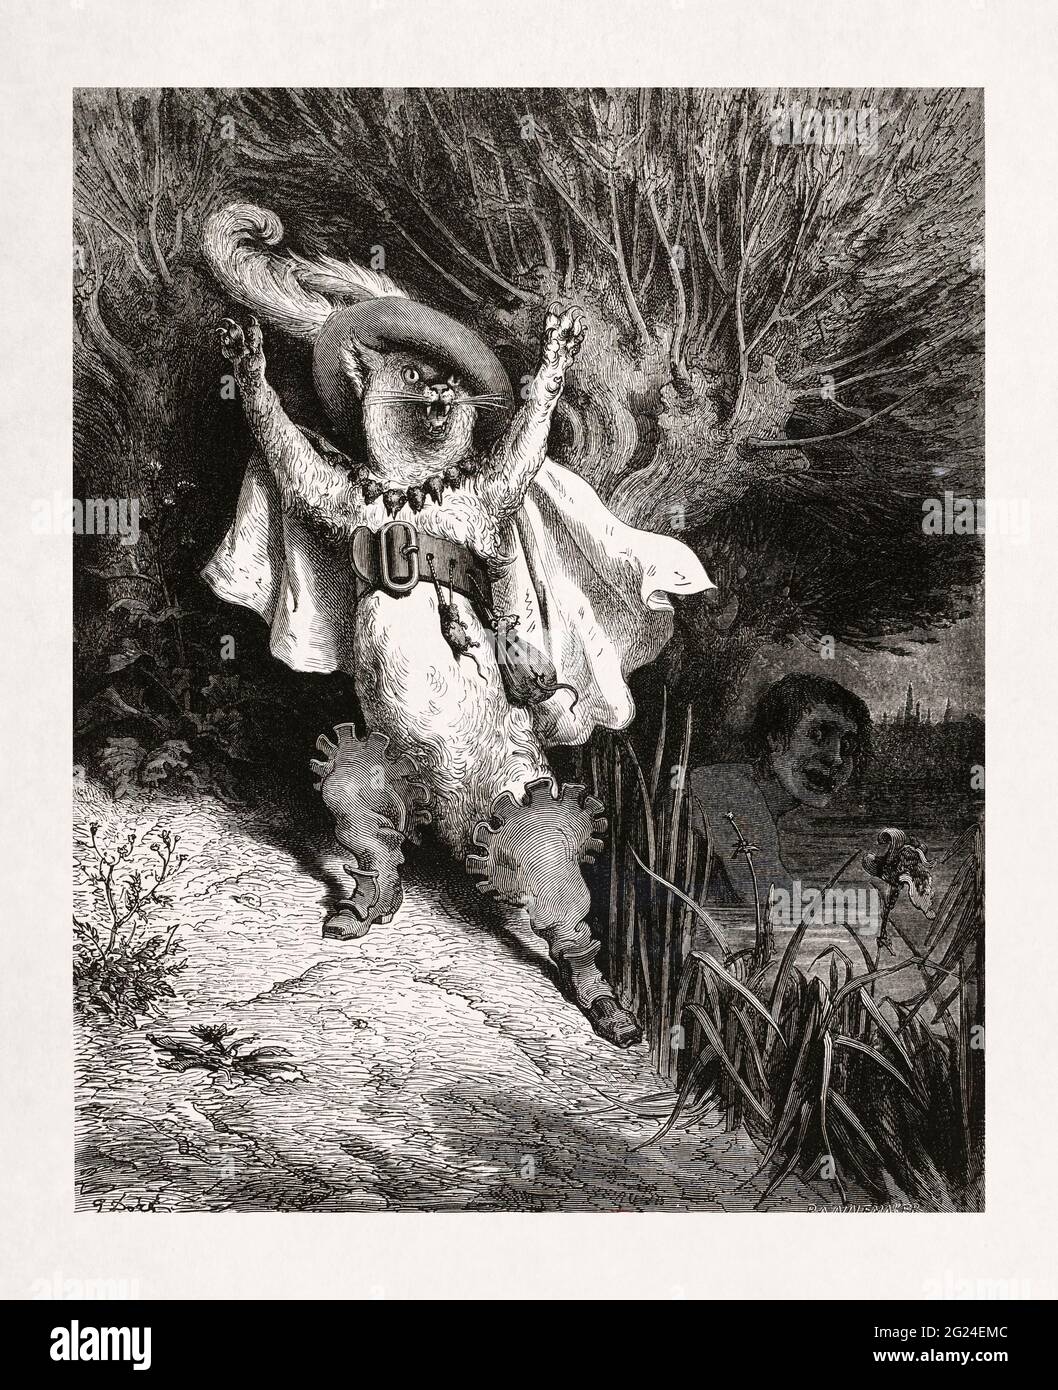 Drawing of the Puss in Boots made in 1862 by Gustave Doré to illustrate a new edition of the works of Charles Perrault originally published in 1697. Stock Photo